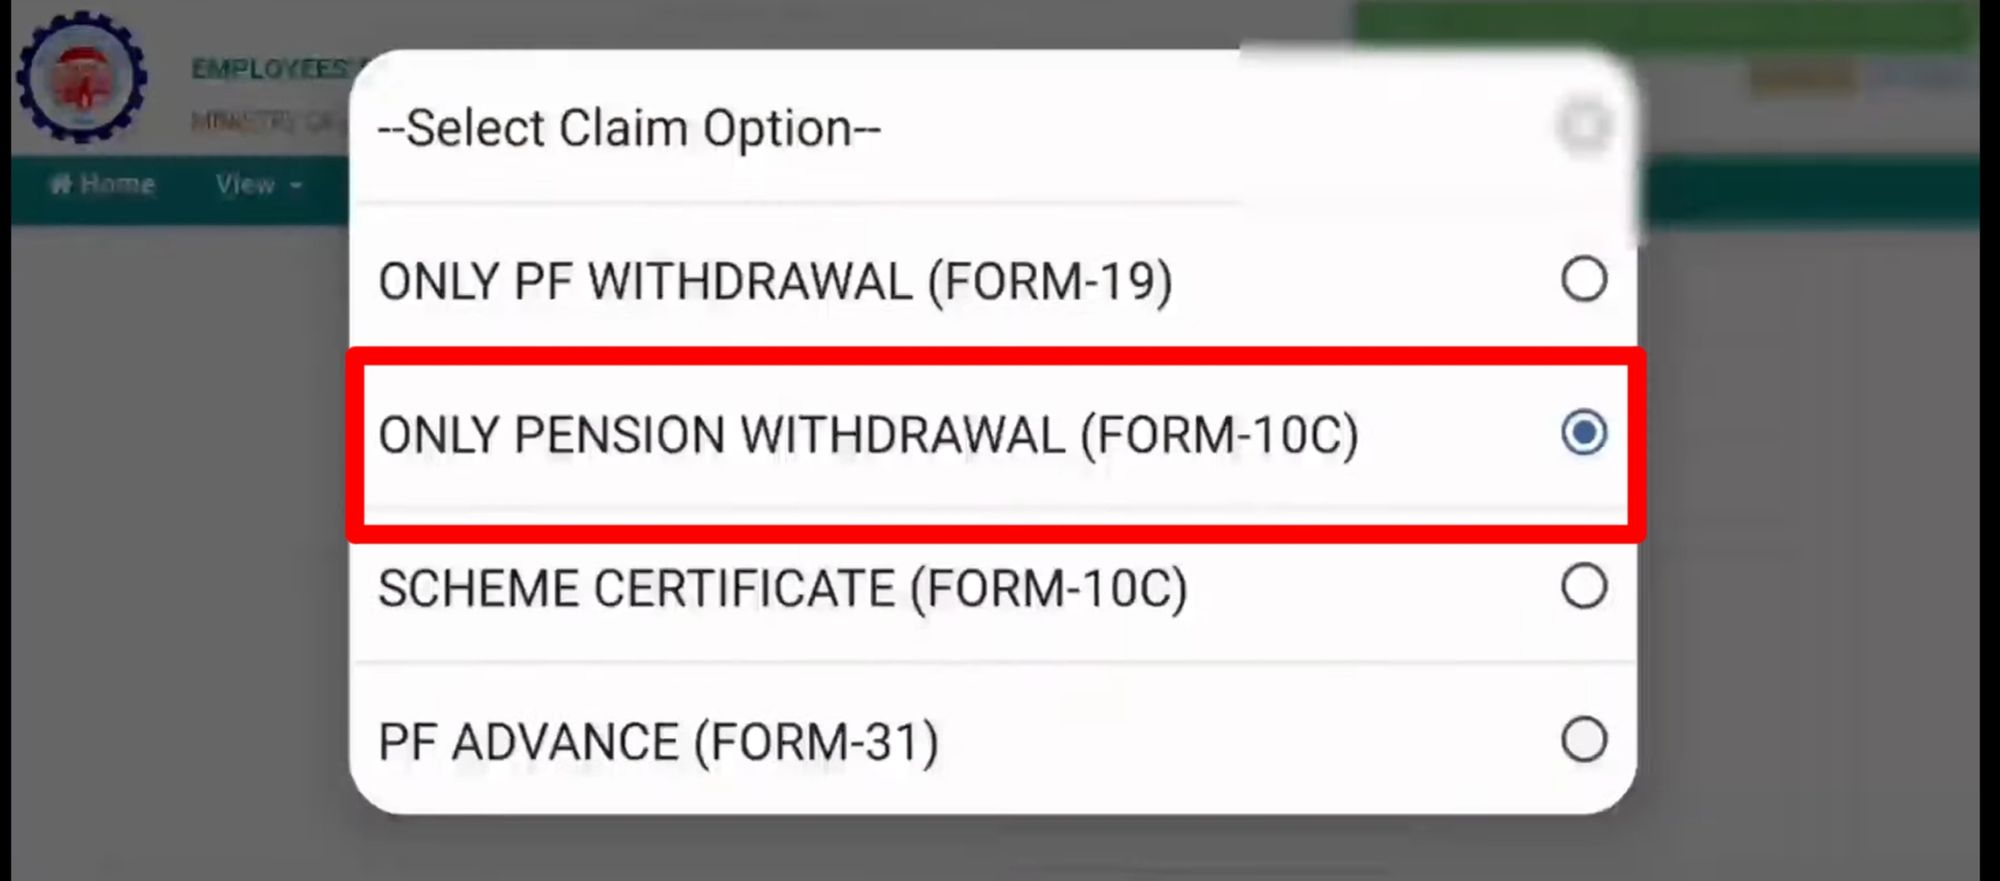 Only Pension withdrawal (Form 10 C